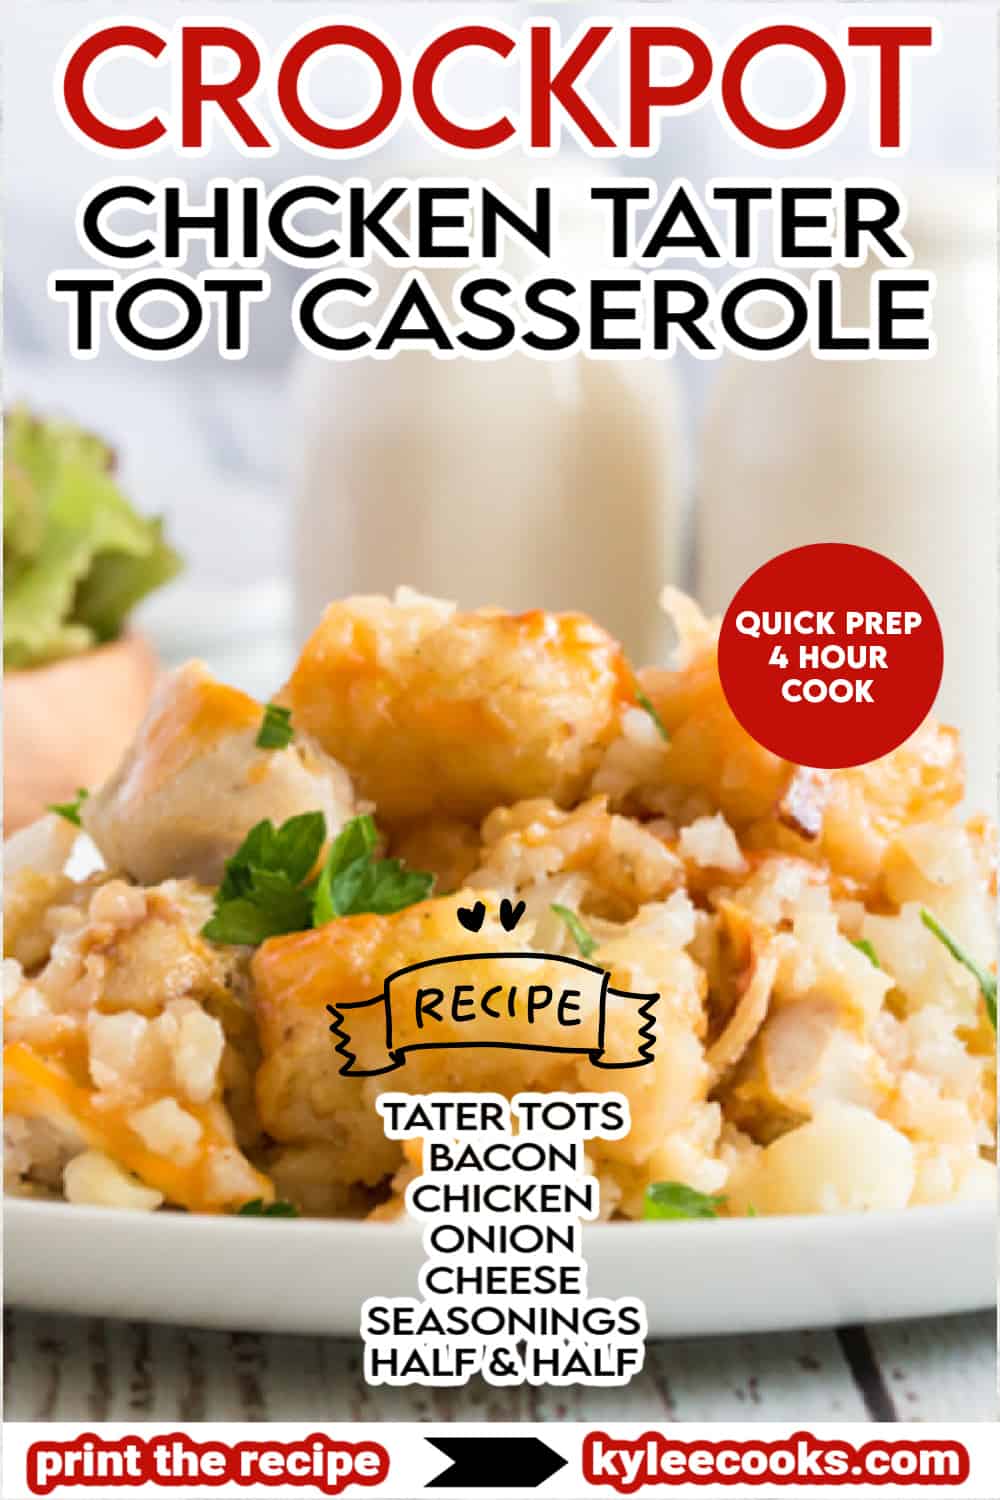 chicken tater tot casserole with ingredient images overlaid and ingredients listed in text.